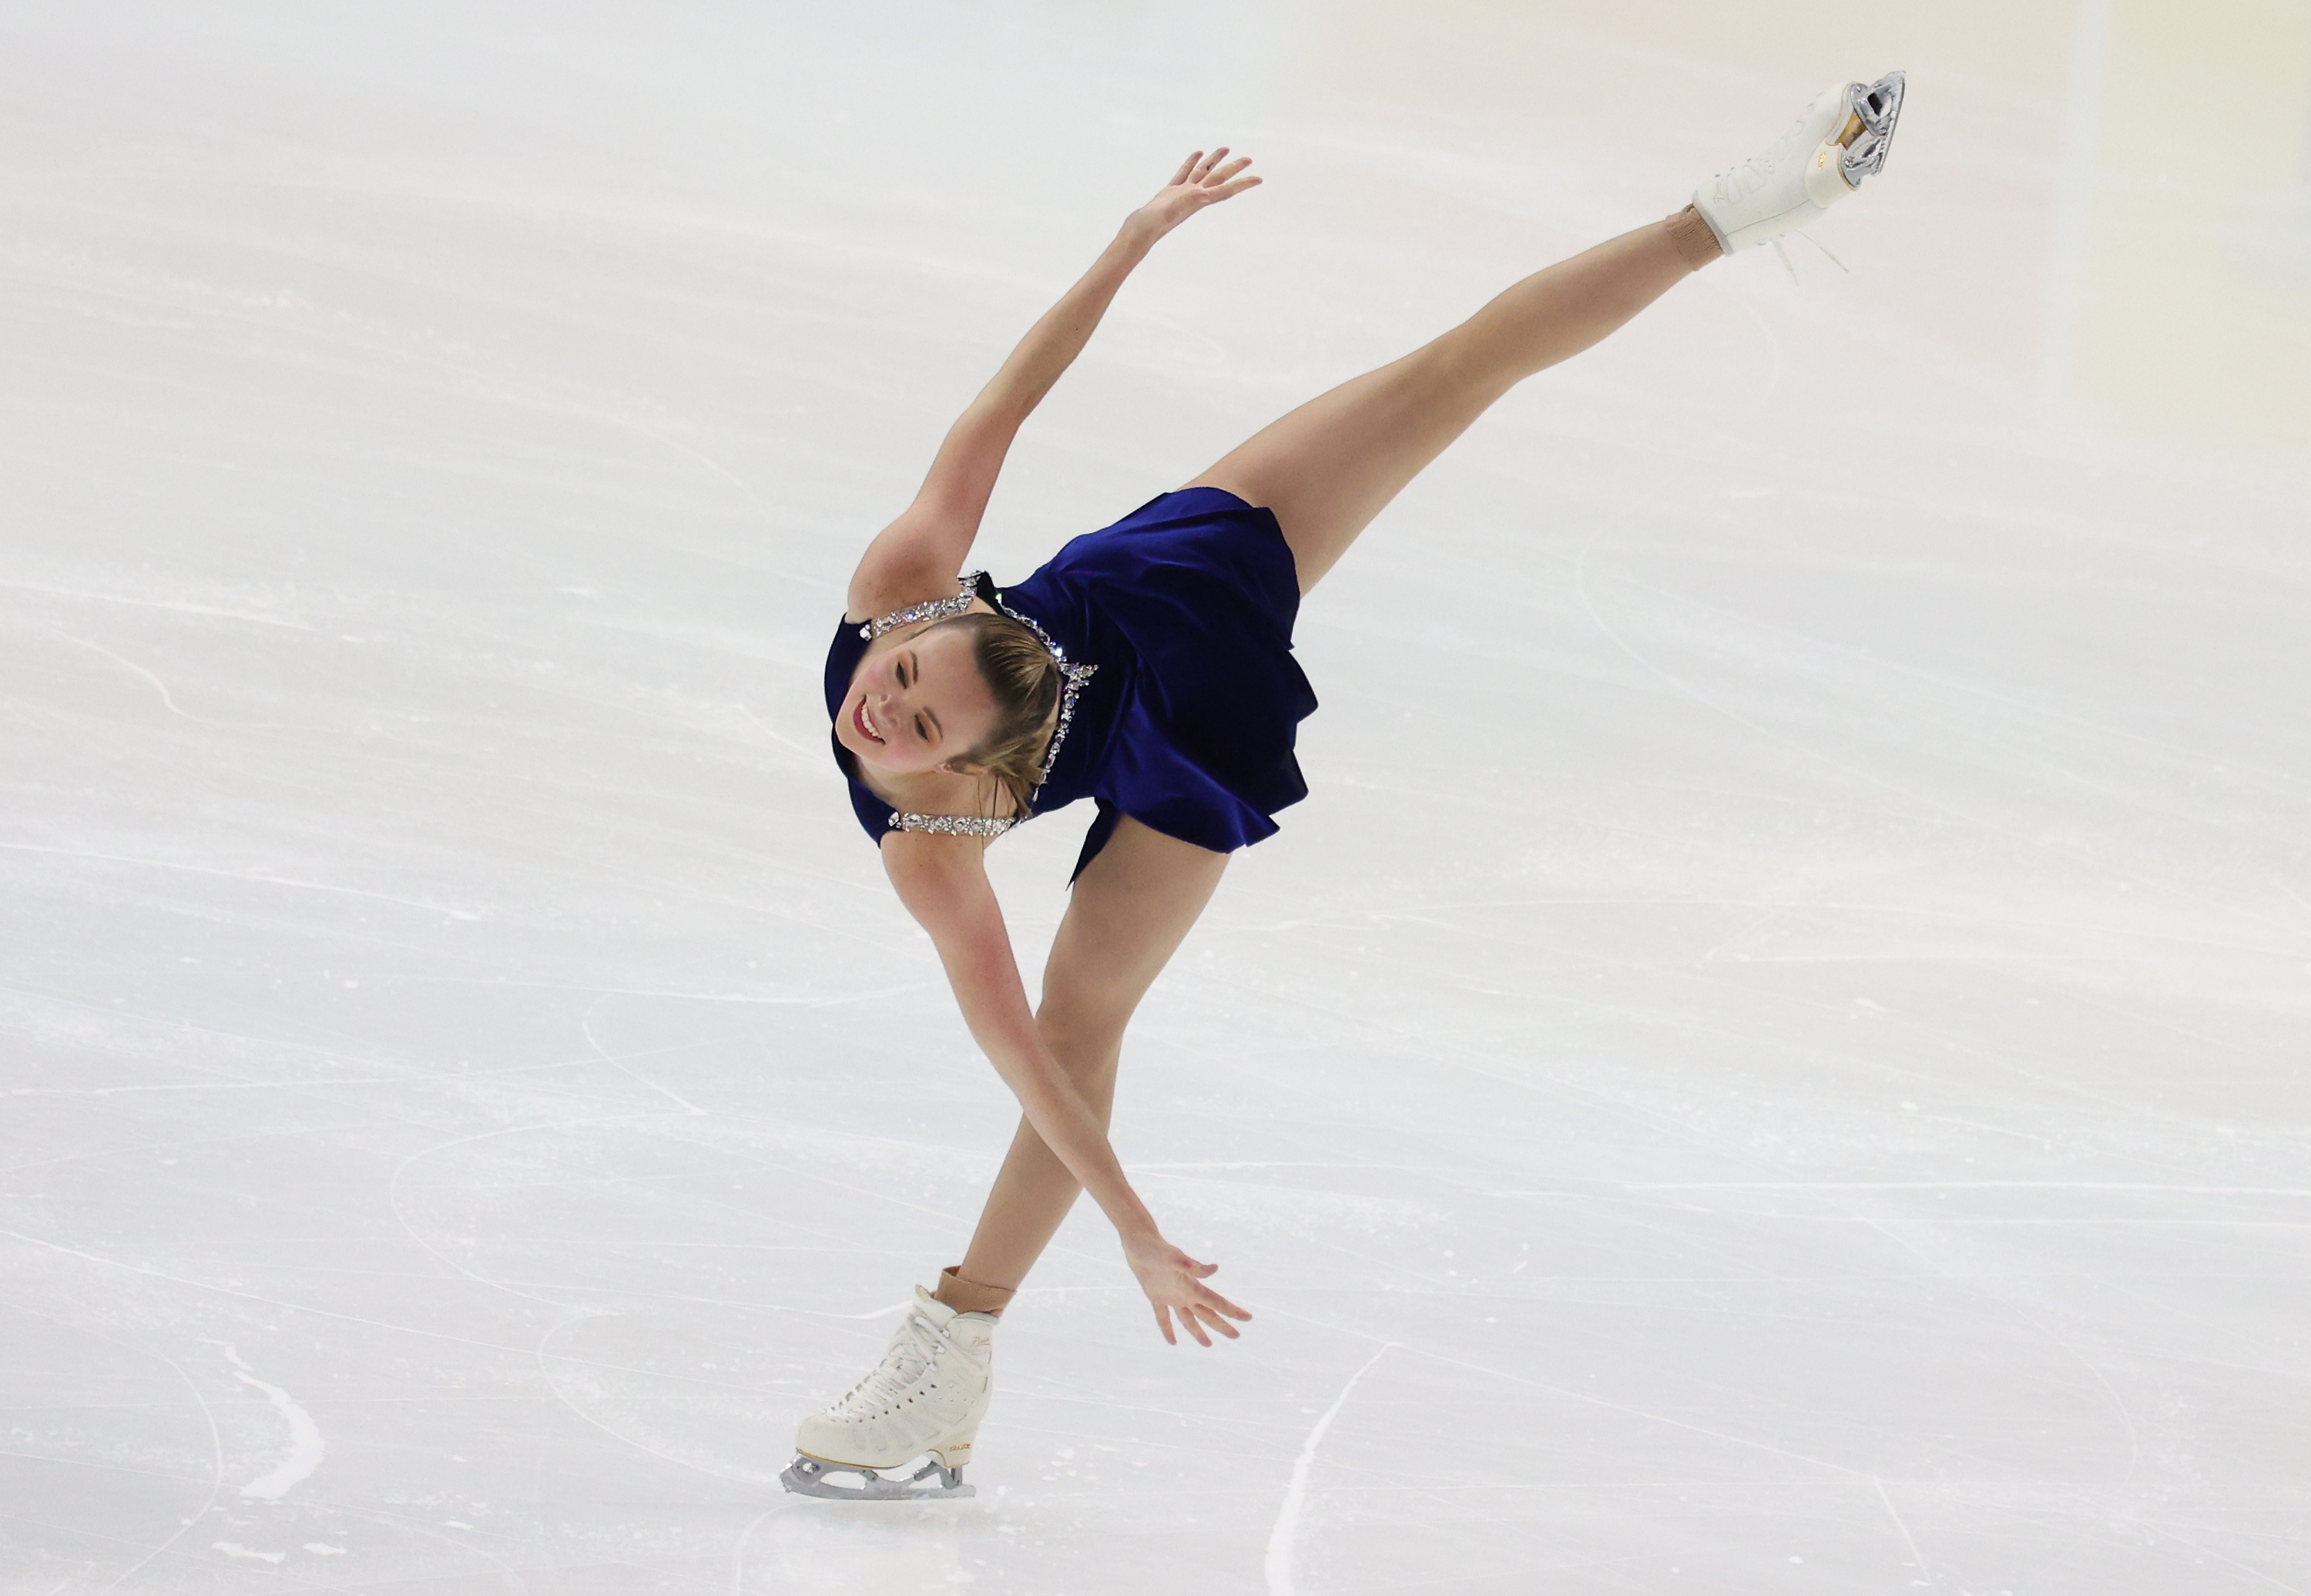 Mariah Bell Wallpapers (11+ images inside)